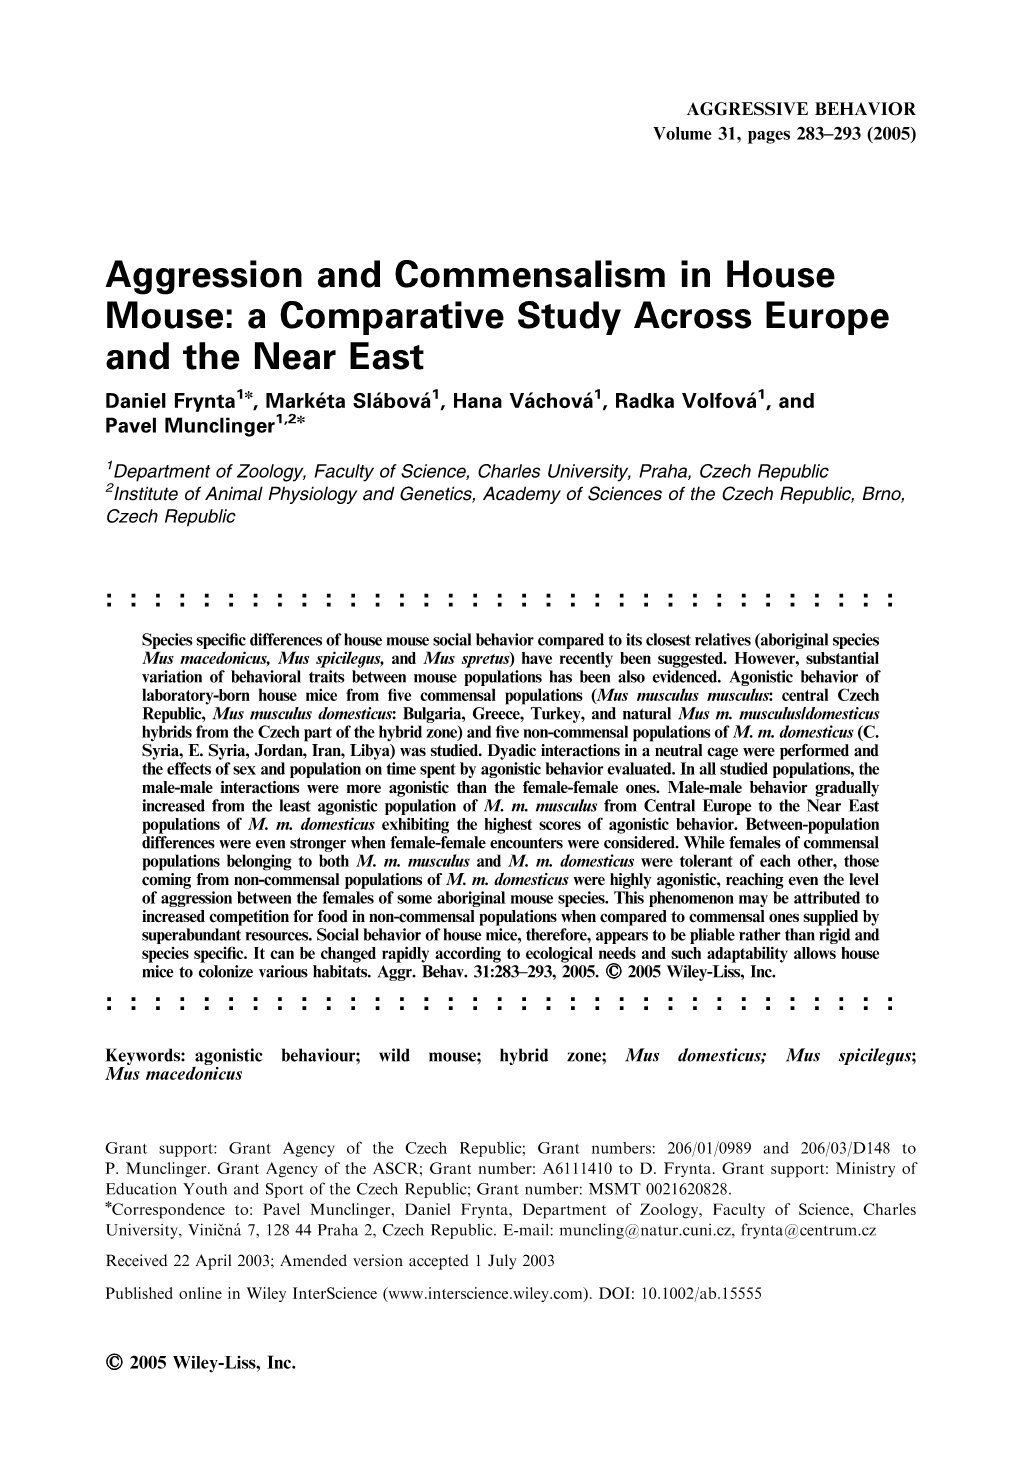 Aggression and Commensalism in House Mouse: a Comparative Study